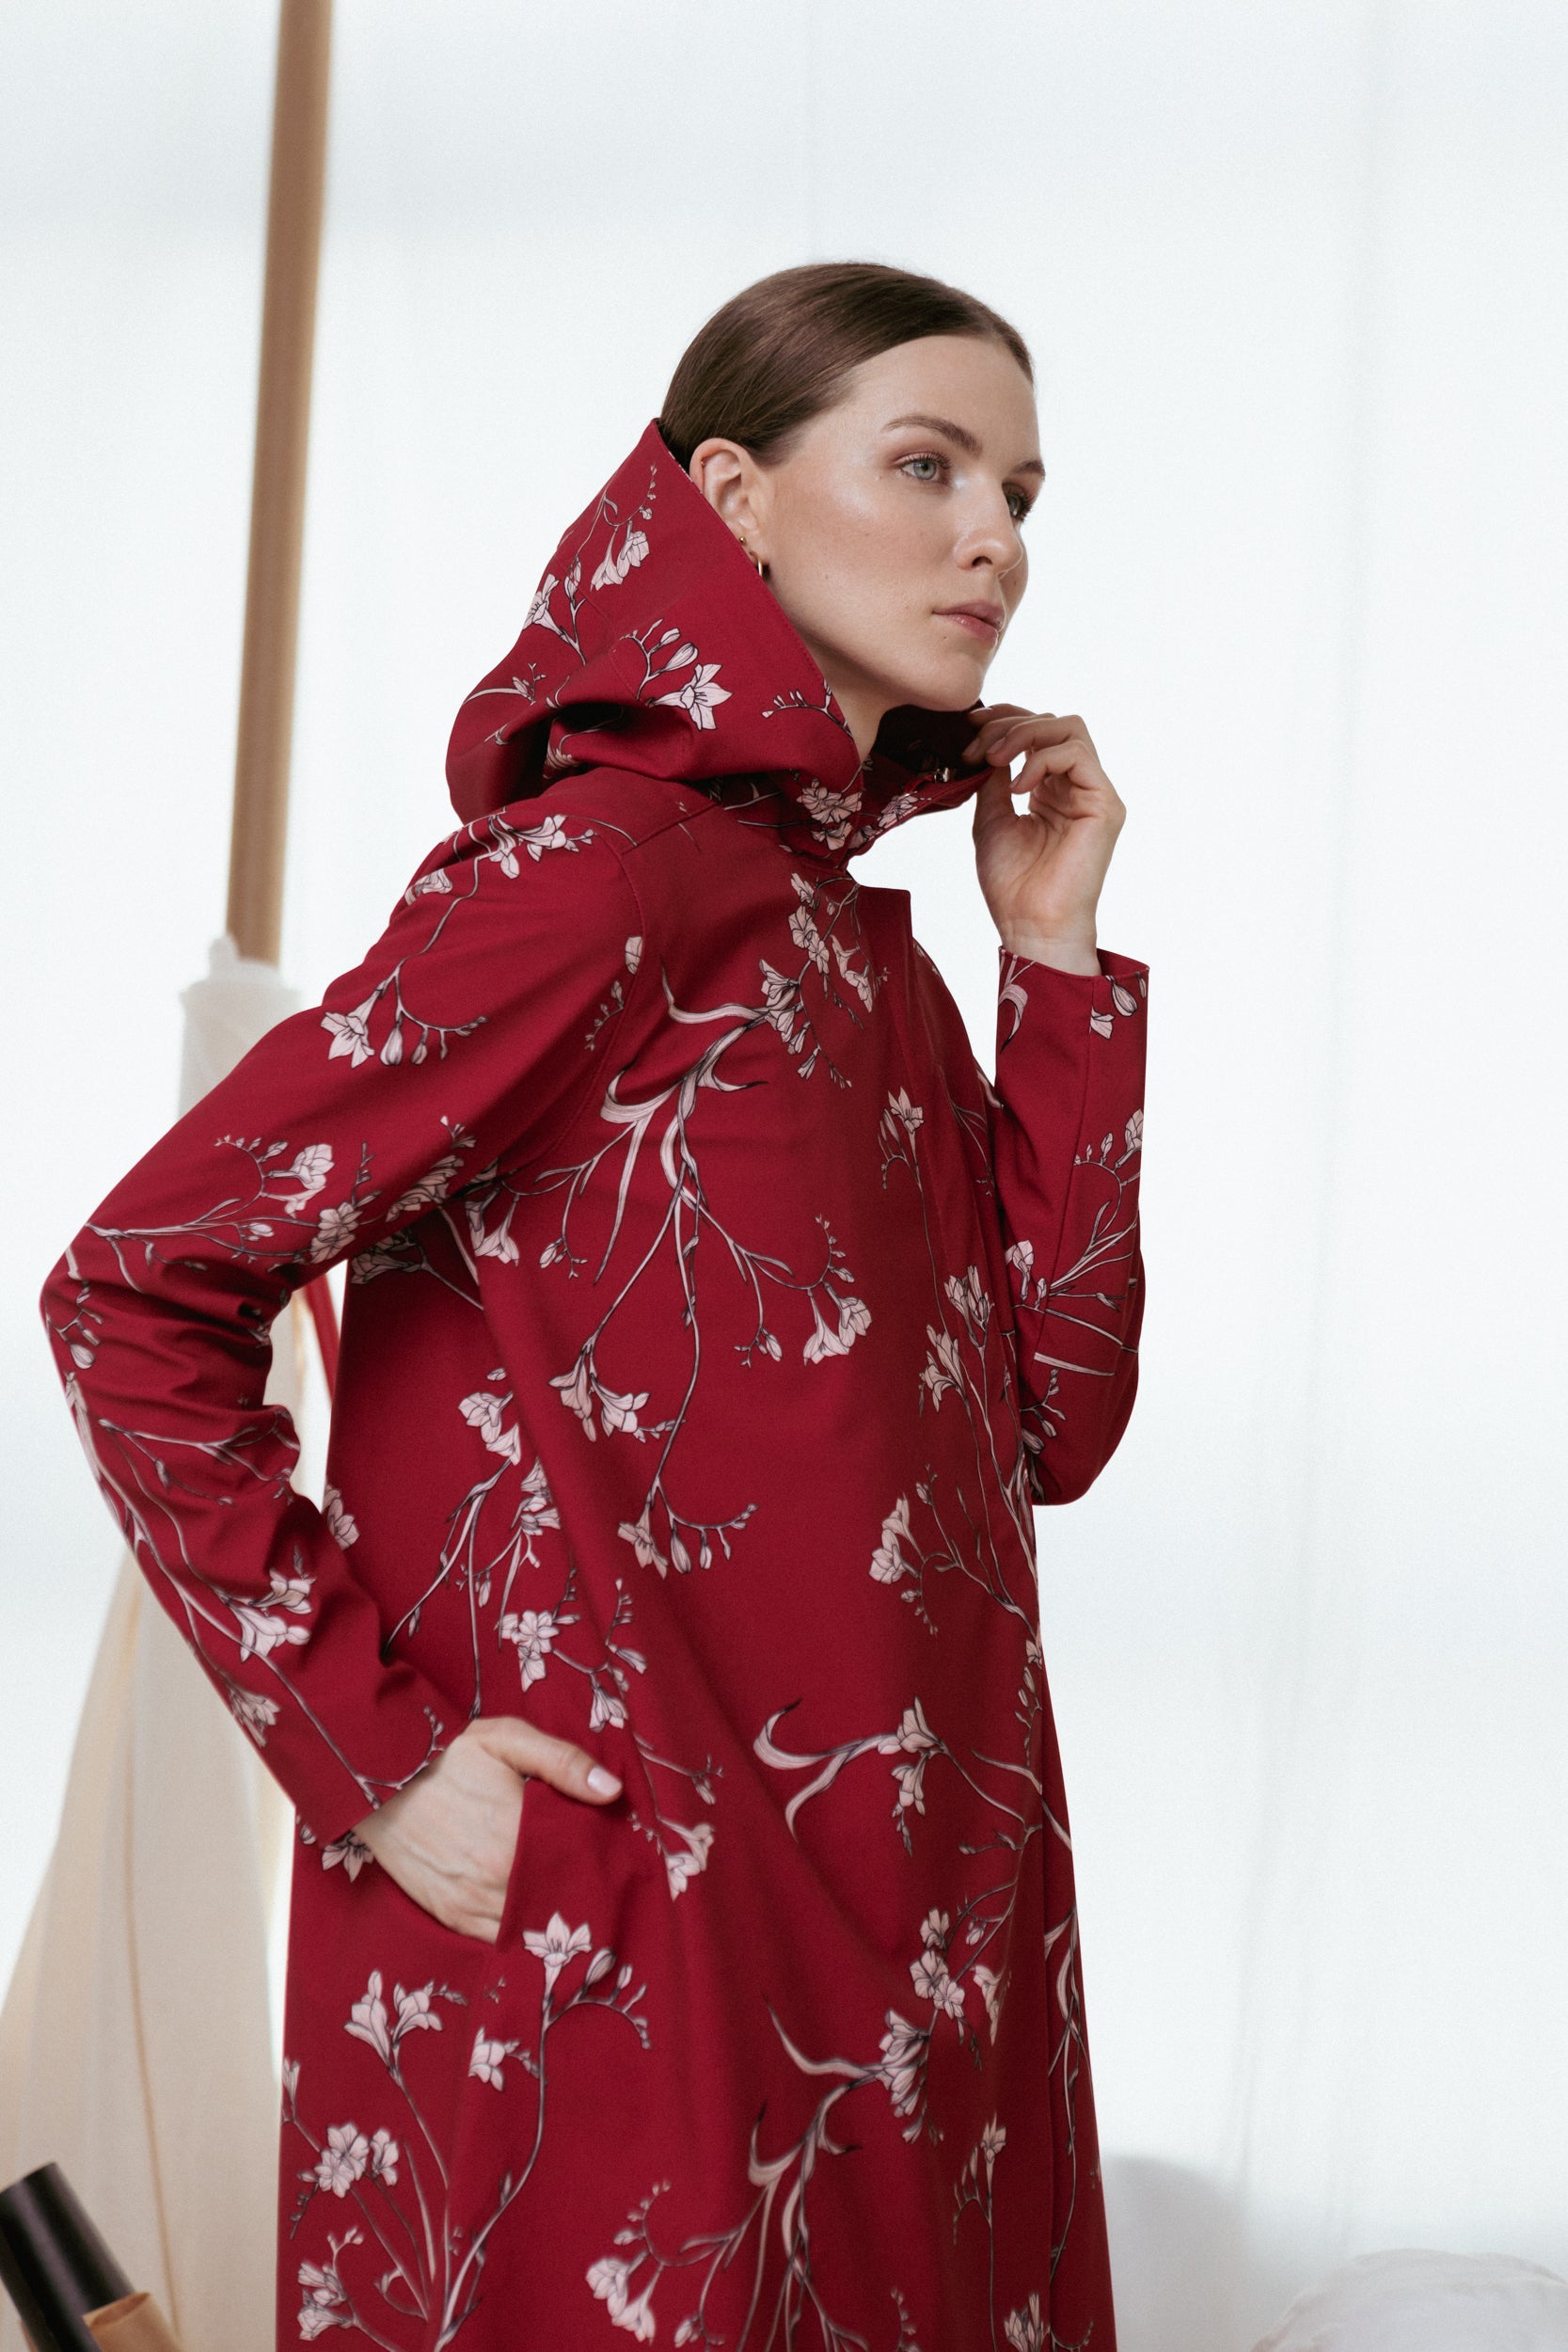 Hooded Women’s Red Raincoat with pockets